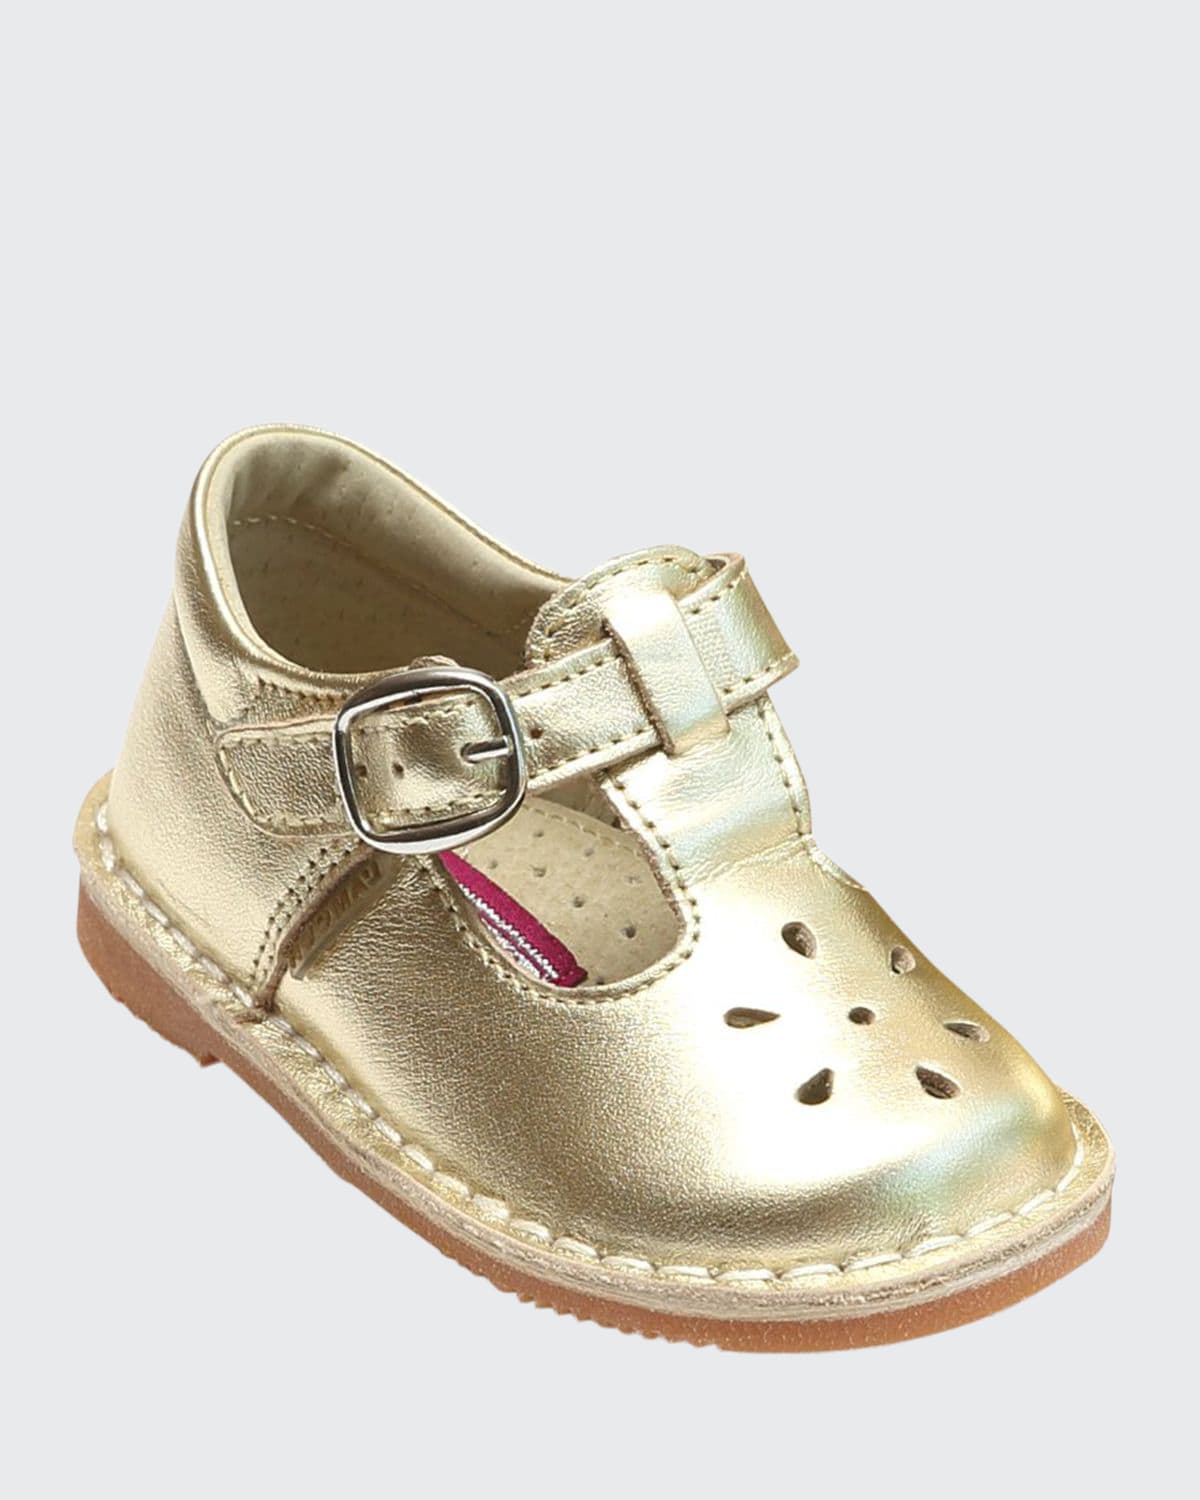 L'AMOUR SHOES GIRL'S JOY METALLIC LEATHER CUTOUT T-STRAP MARY JANE, BABY/TODDLER/KIDS